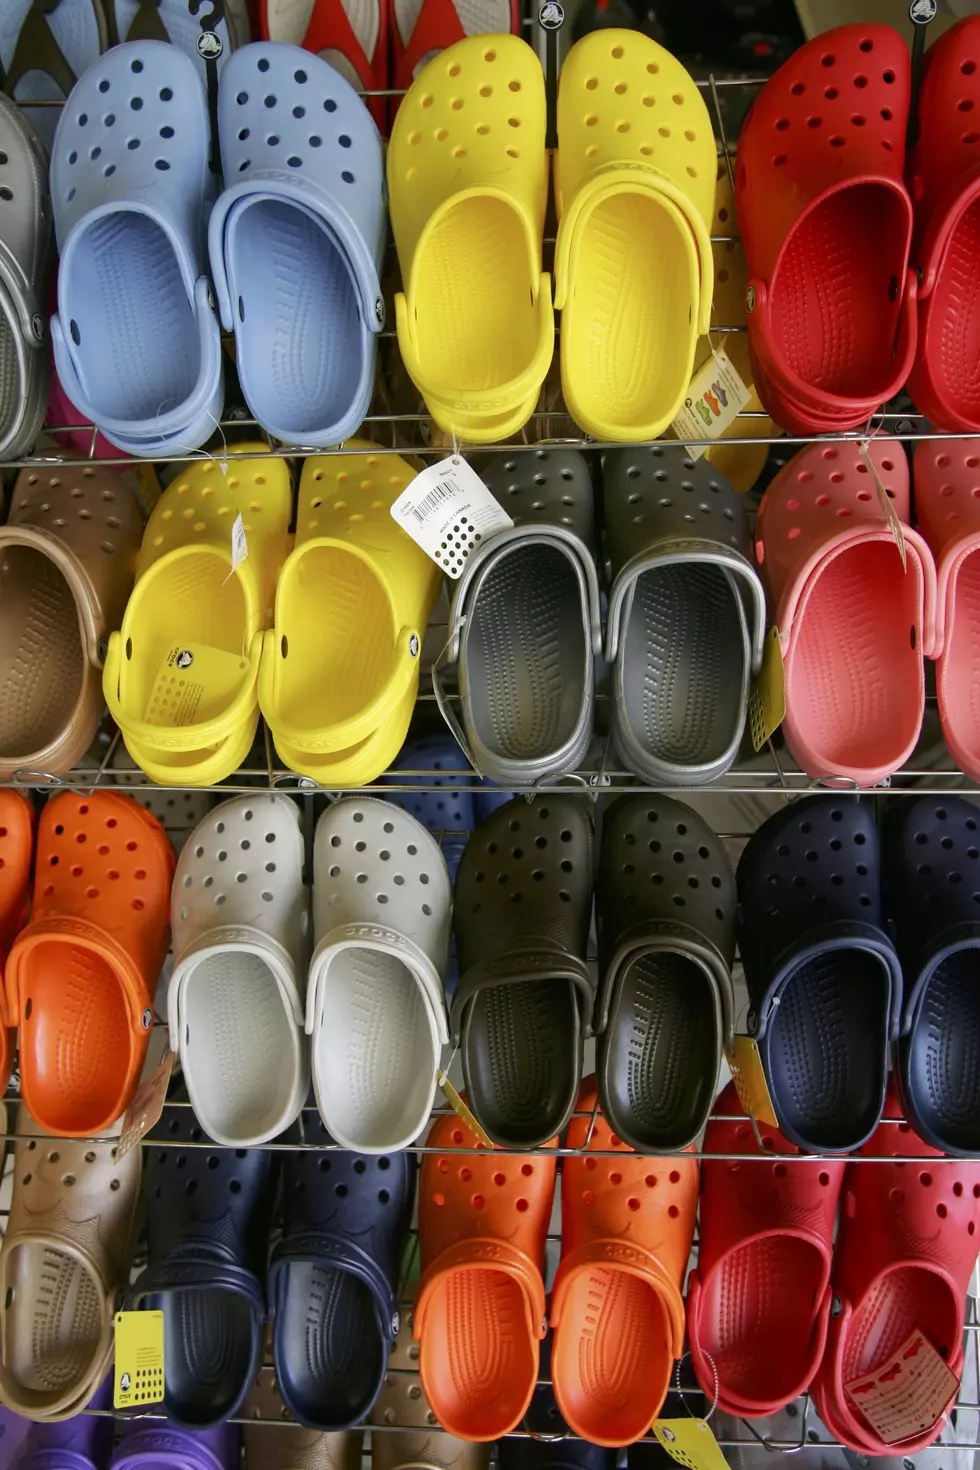 Healthcare Workers Can Receive A Free Pair Of Crocs, Here’s How